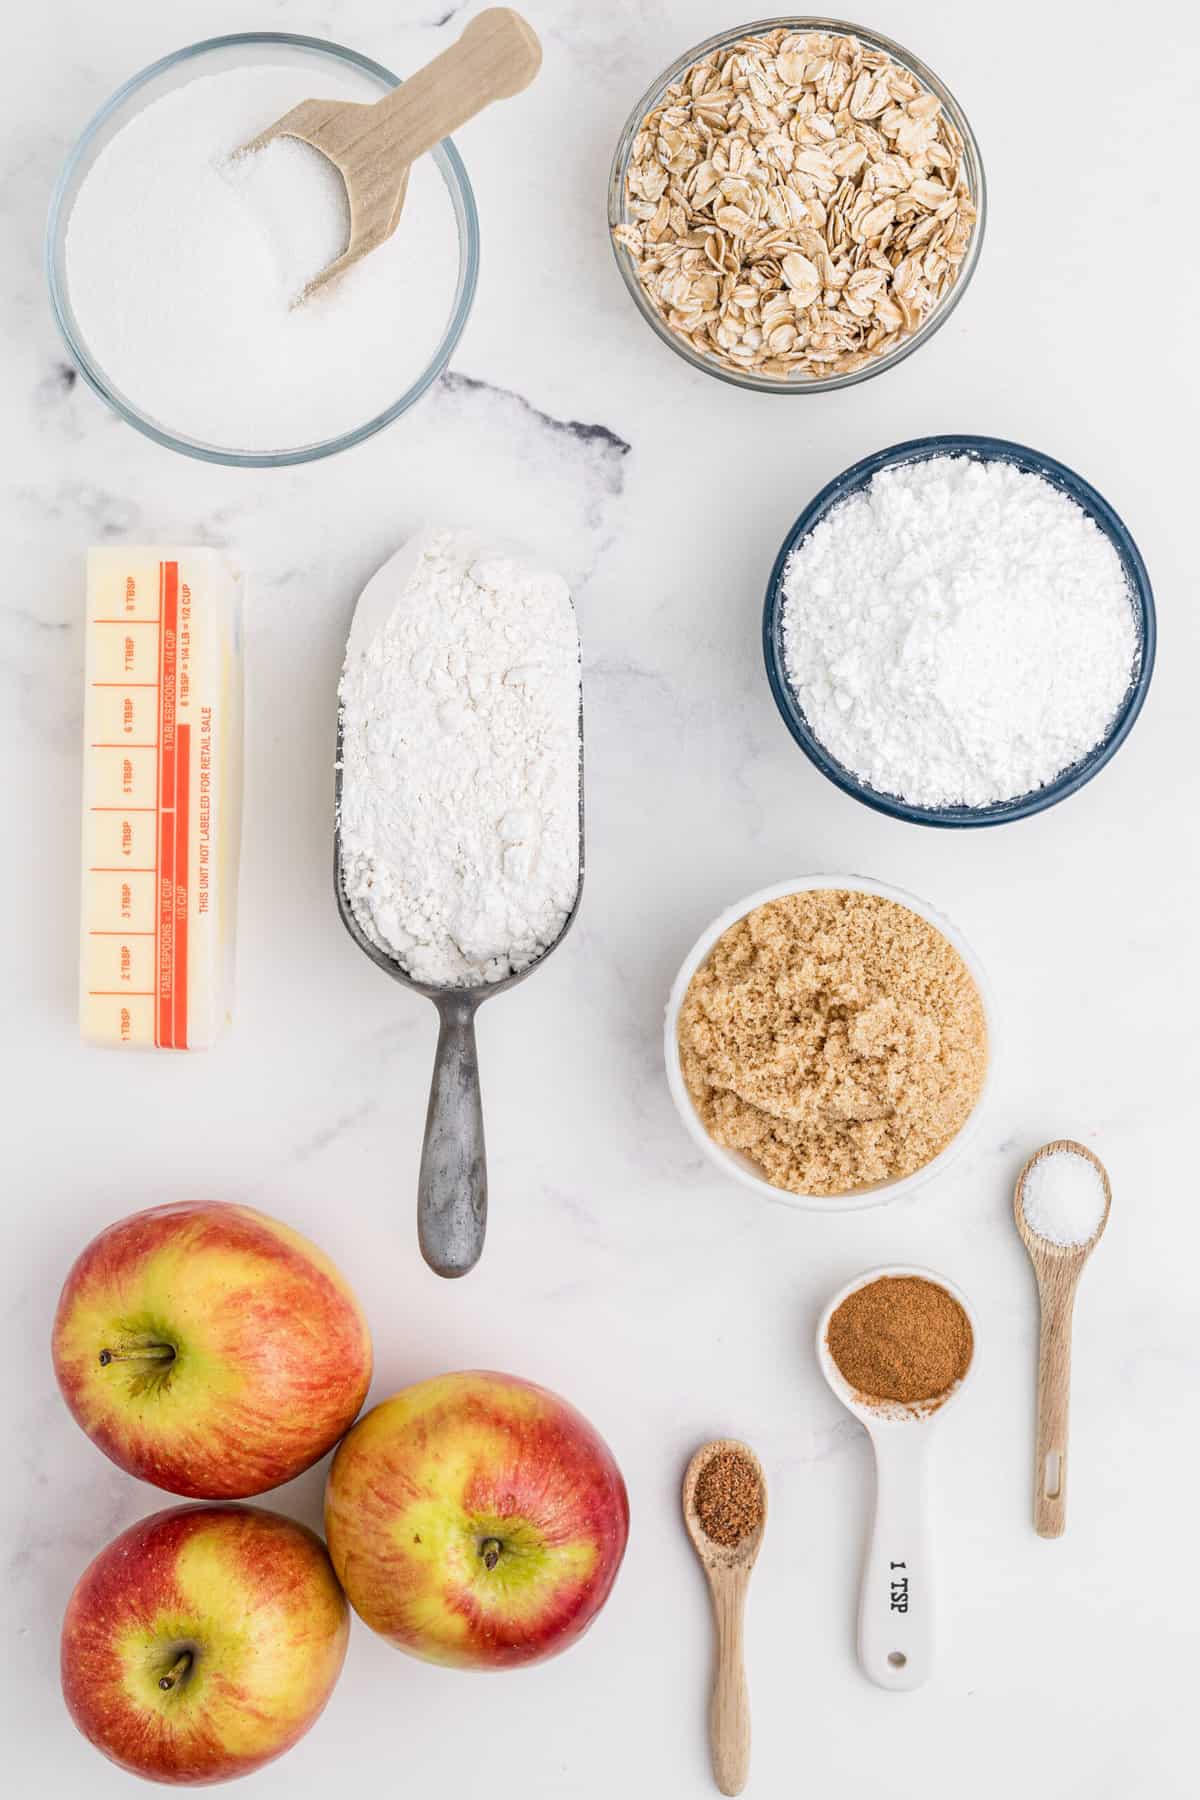 The ingredients for apple pie bars are placed on a white surface.